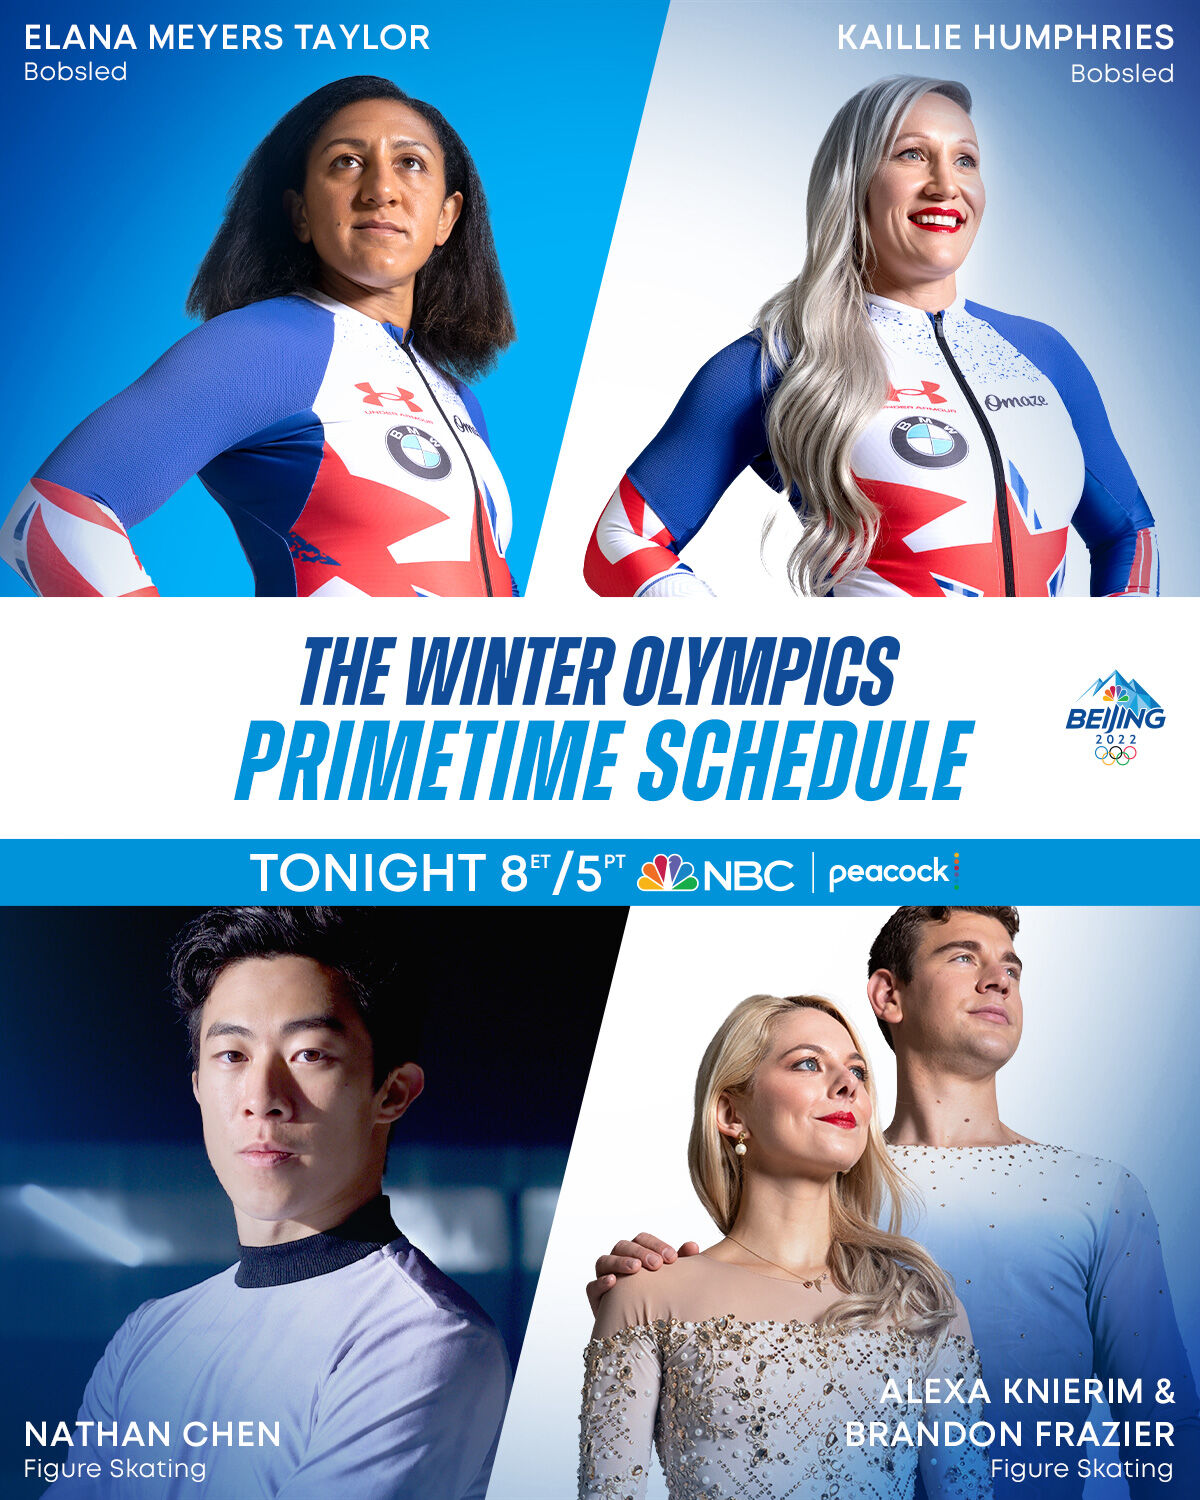 Your guide to the 2022 Winter Olympics Saturday, Feb